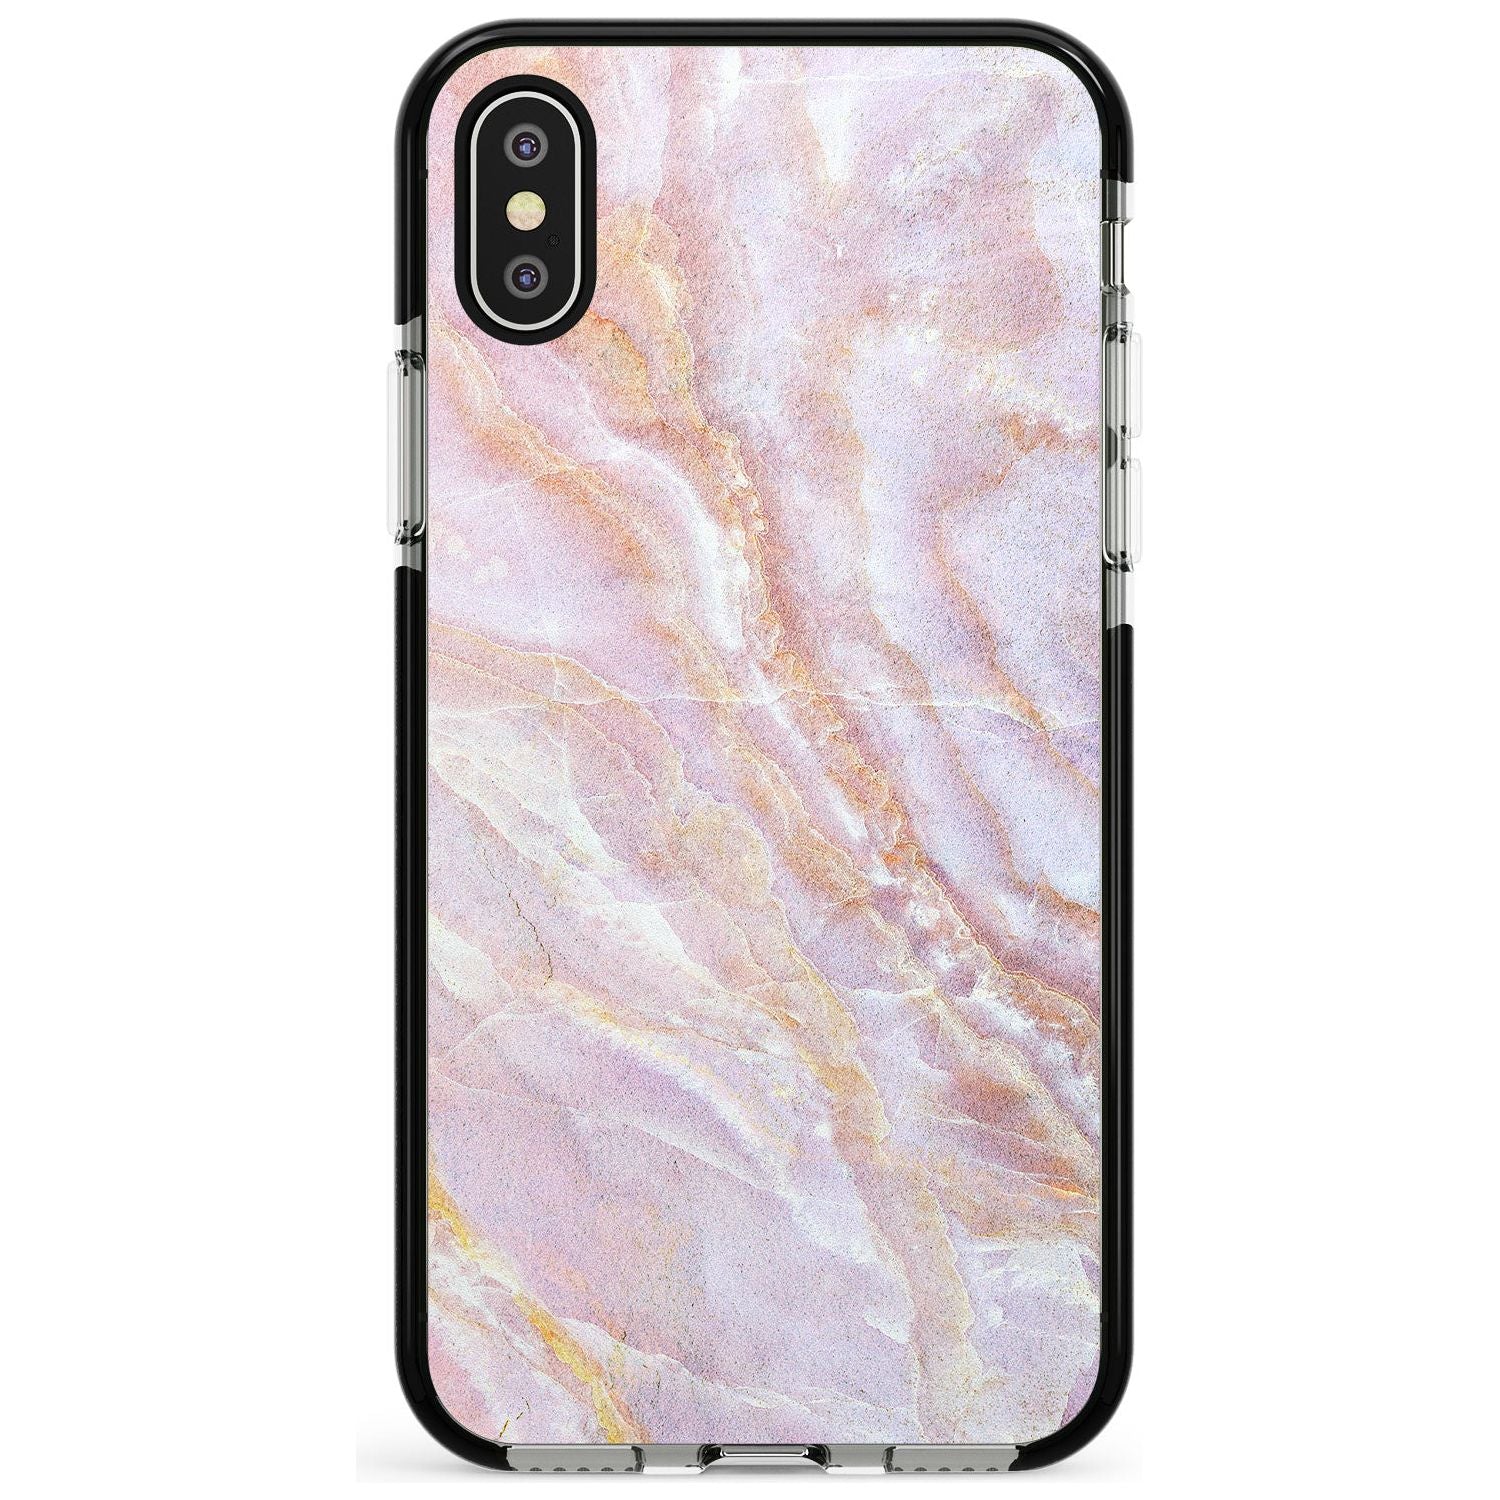 Soft Pink & Yellow Onyx Marble Texture Pink Fade Impact Phone Case for iPhone X XS Max XR